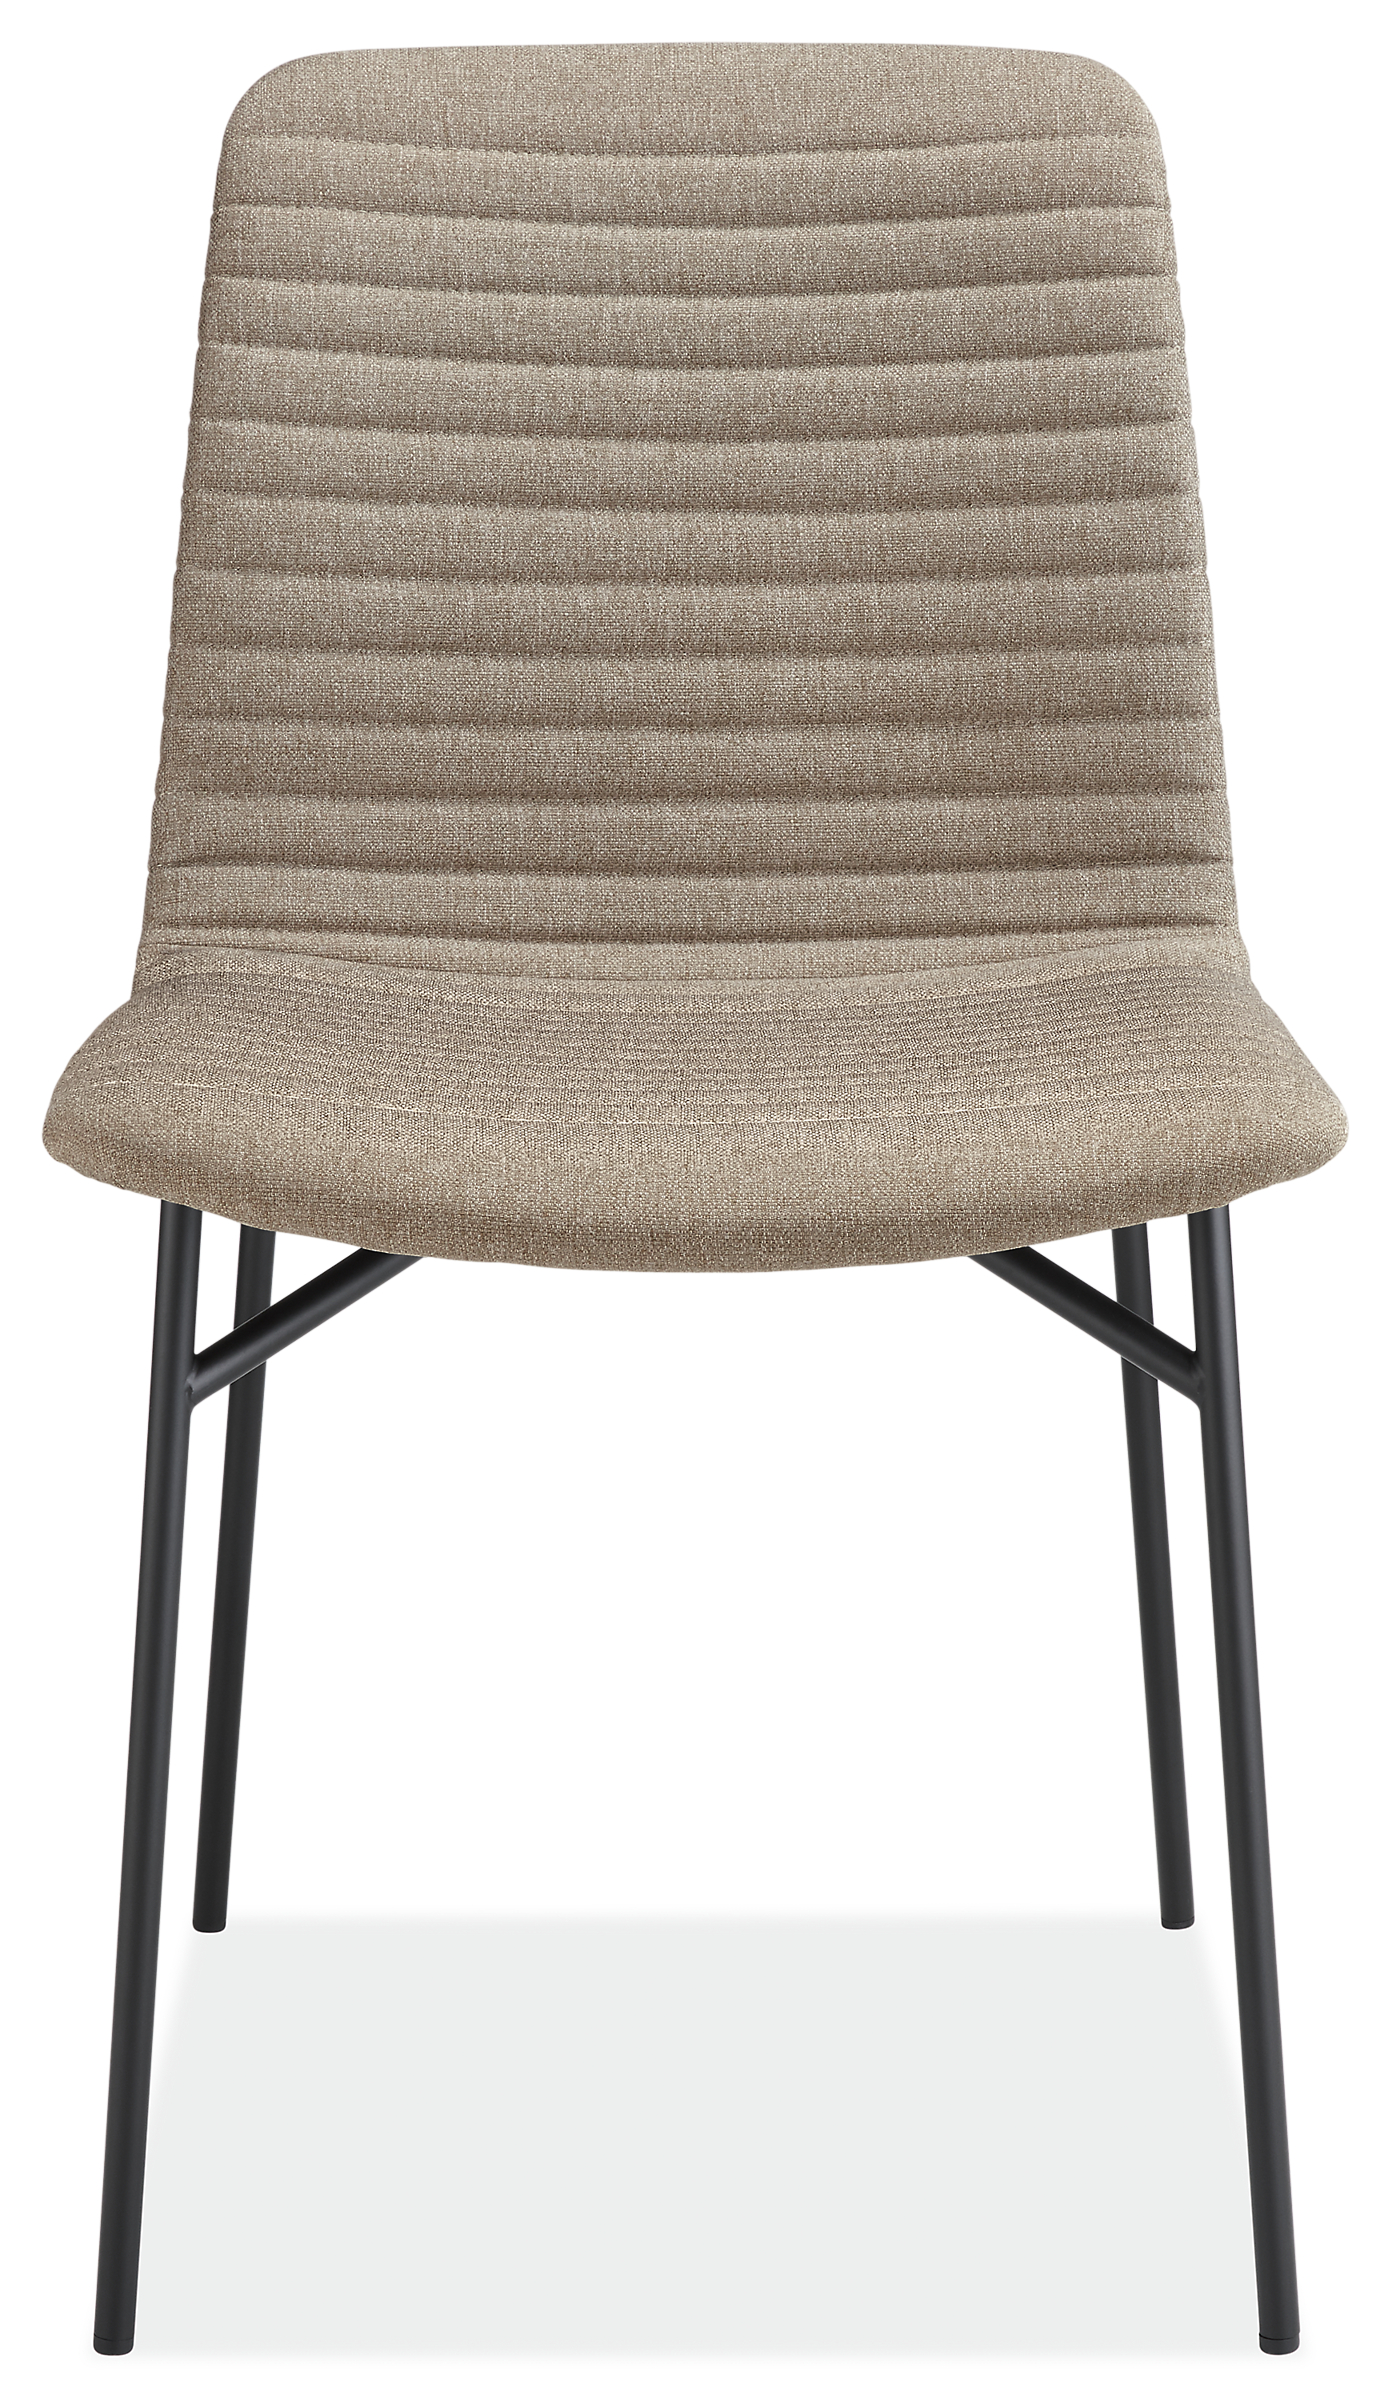 Front view of Cato Side Chair in Medley Fabric.